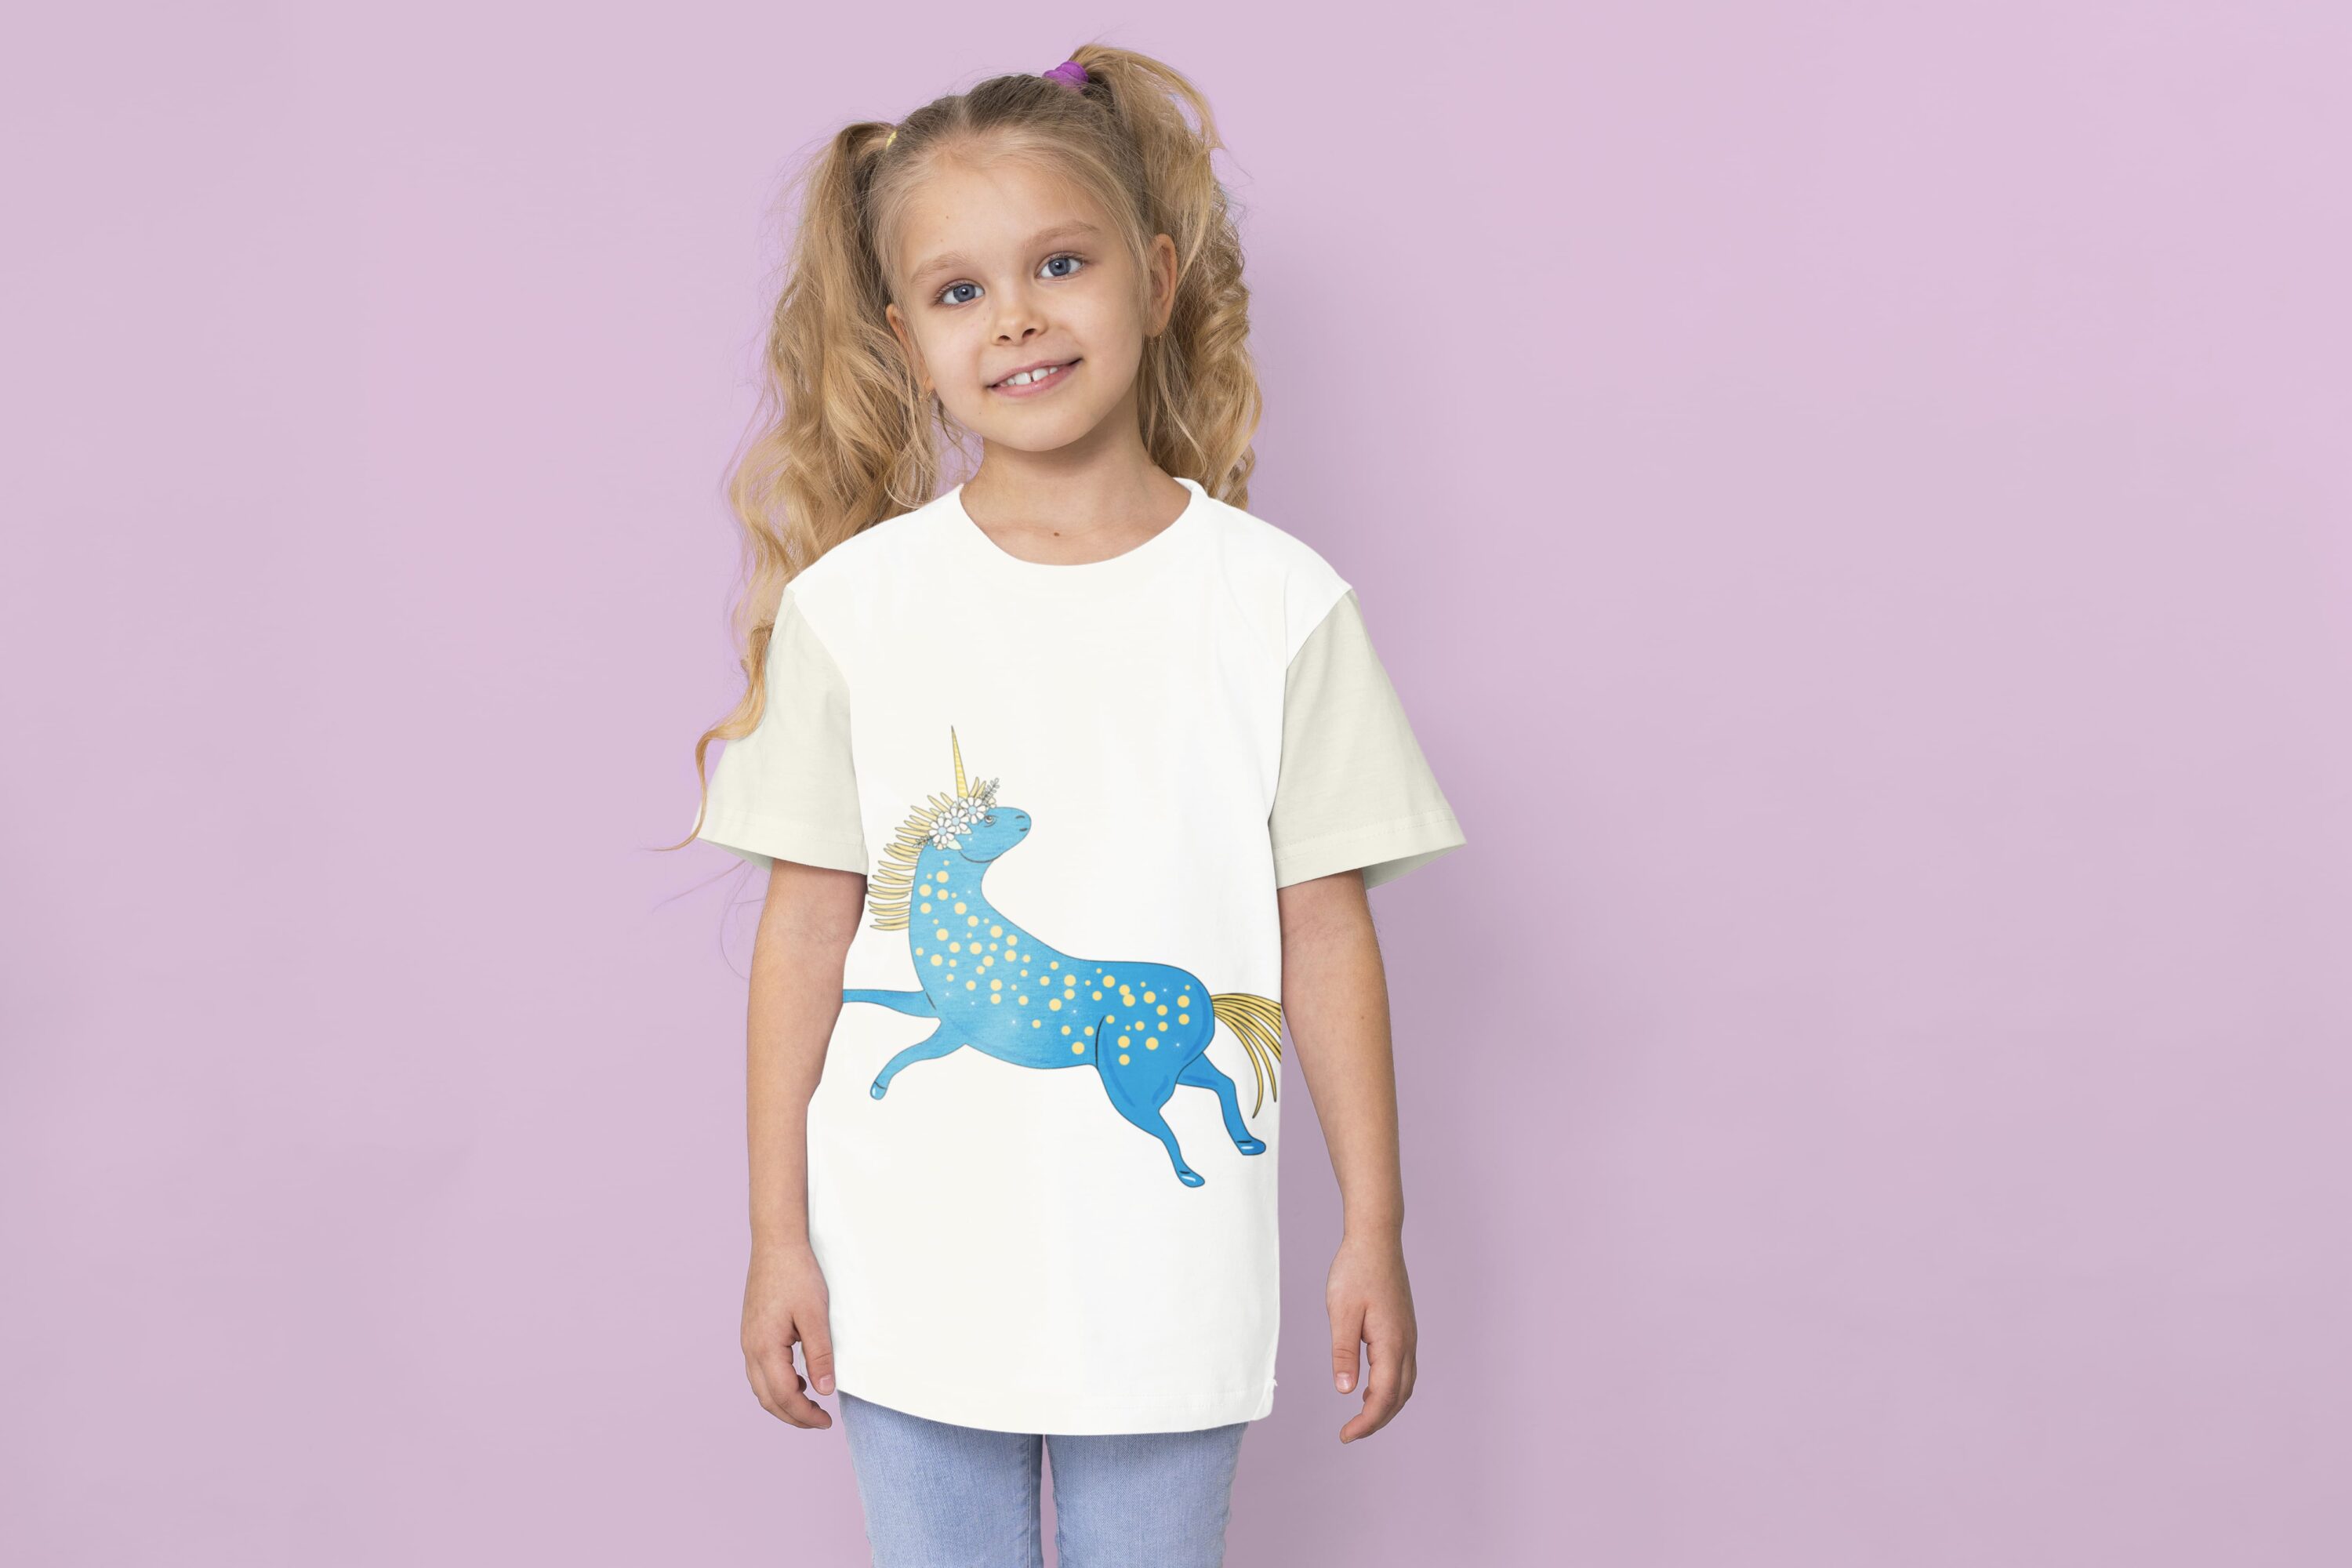 A white t-shirt with a blue unicorn on a girl on a lavender background.